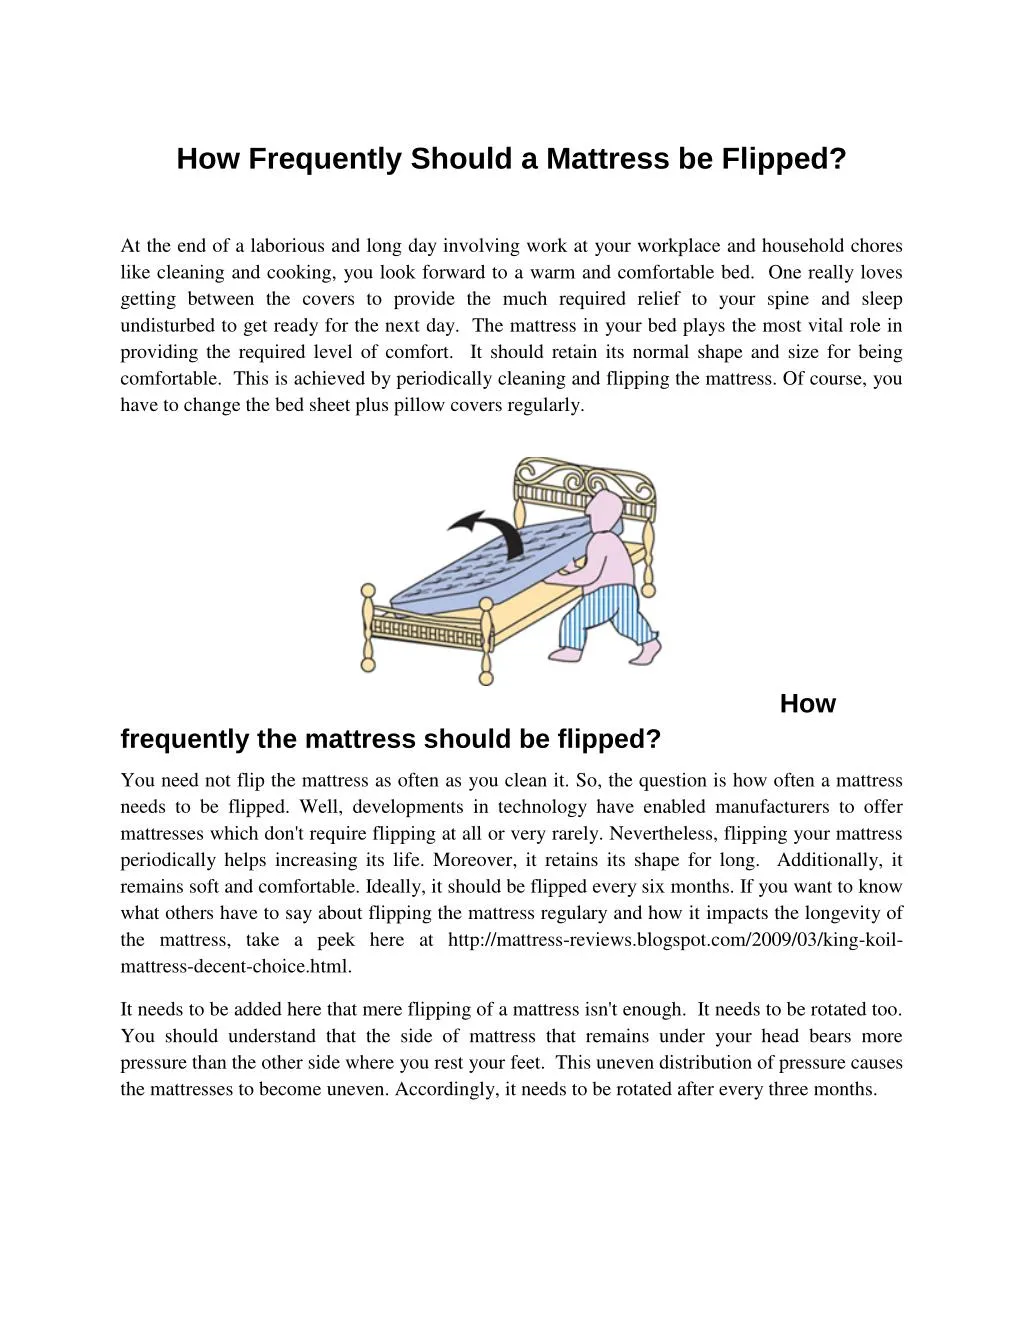 how frequently should a mattress be flipped